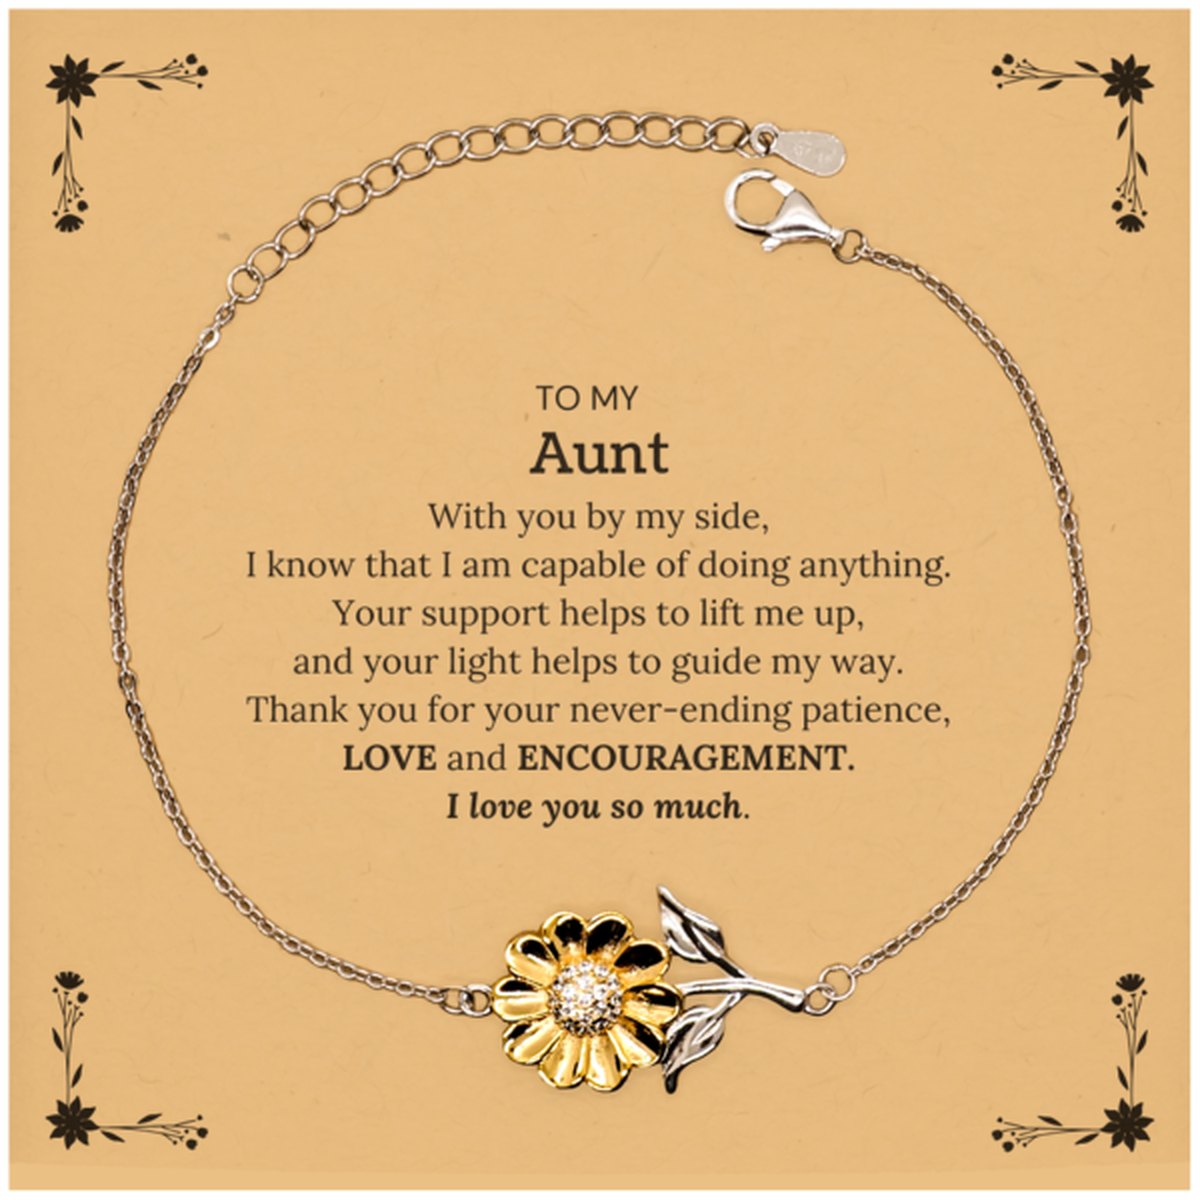 Appreciation Aunt Sunflower Bracelet Gifts, To My Aunt Birthday Christmas Wedding Keepsake Gifts for Aunt With you by my side, I know that I am capable of doing anything. I love you so much